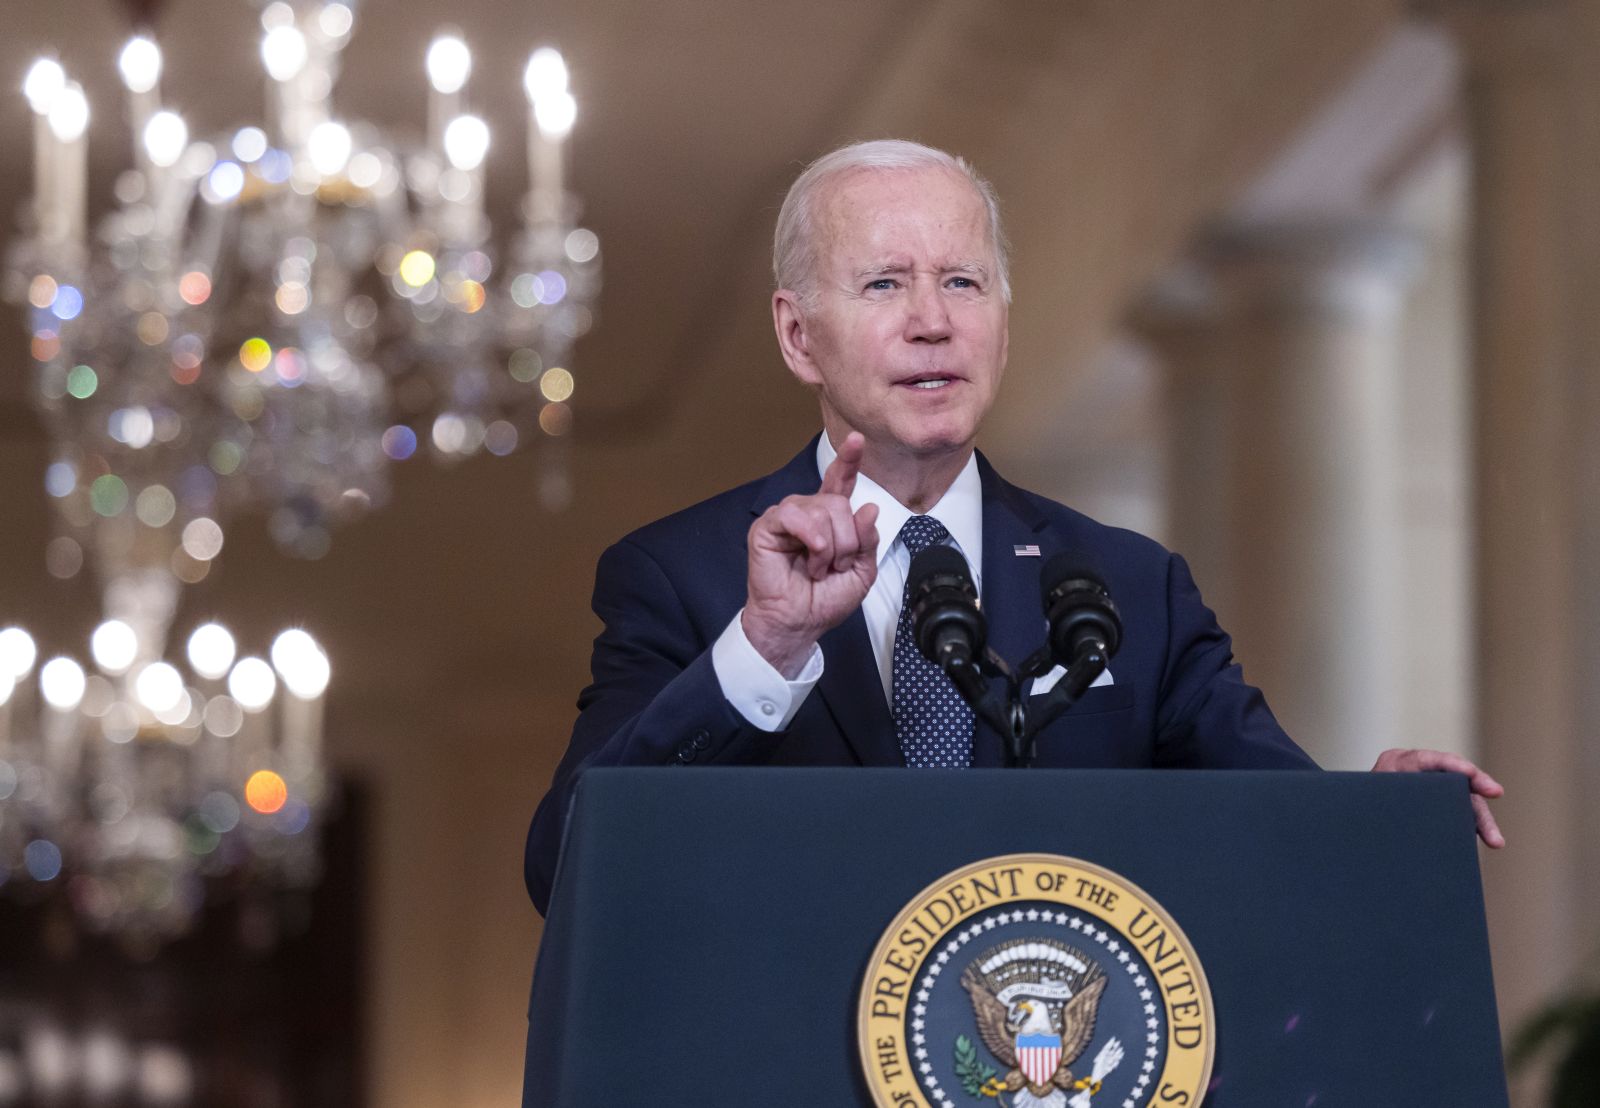 epa09992863 US President Joe Biden speaks to the nation about the 'recent tragic mass shootings' in the East Room of the White House in Washington, DC, USA, 02 June 2022. Biden called on Congress to pass 'commonsense' gun laws to combat the epidemic of gun violence.  EPA/JIM LO SCALZO